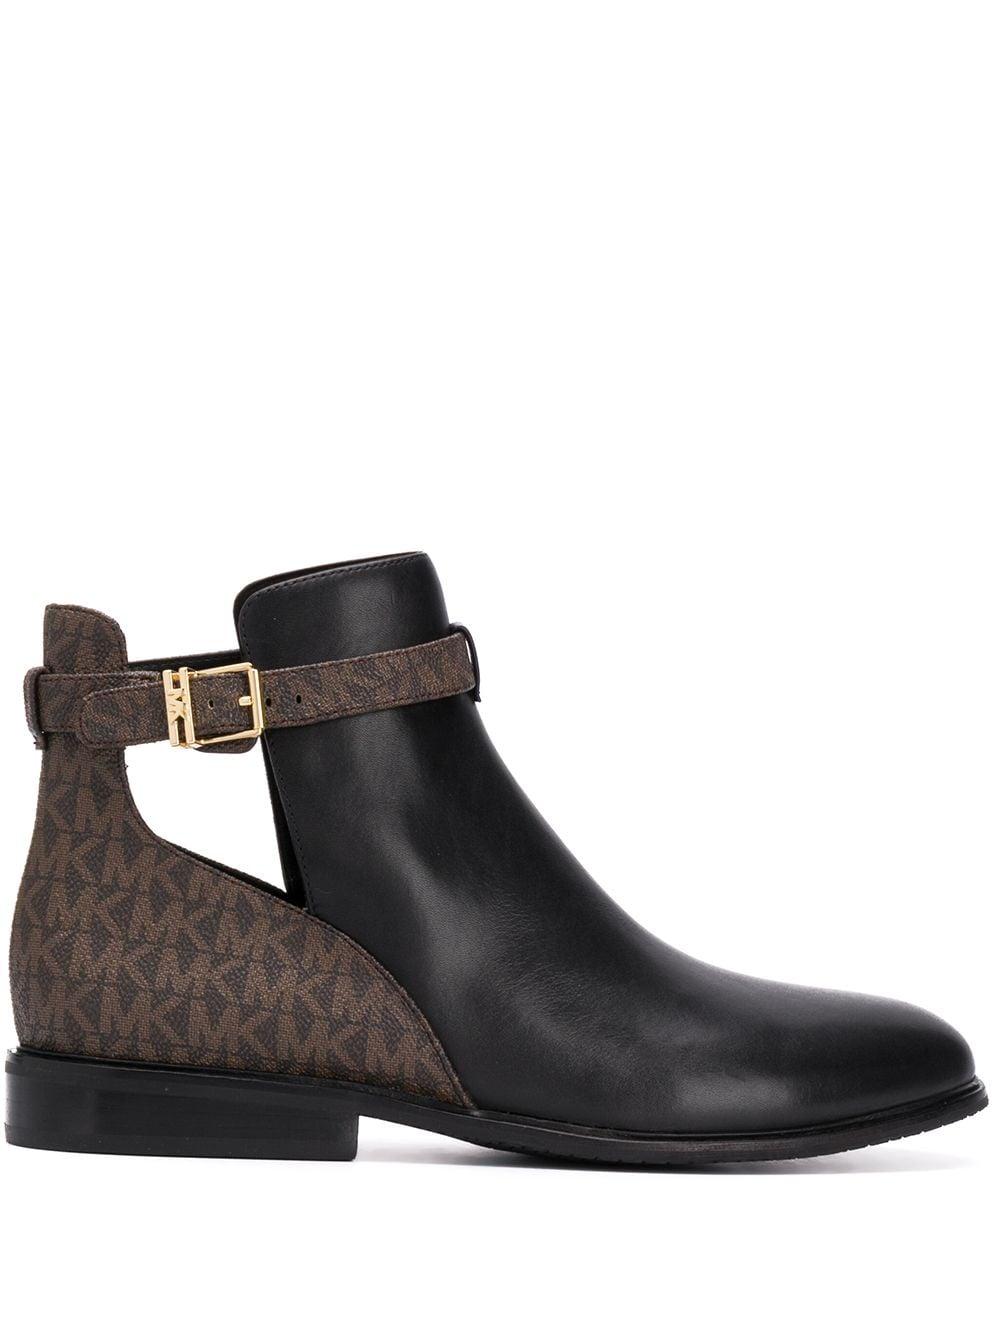 MICHAEL Michael Kors Leather Lawson Ankle Boots in Black - Lyst